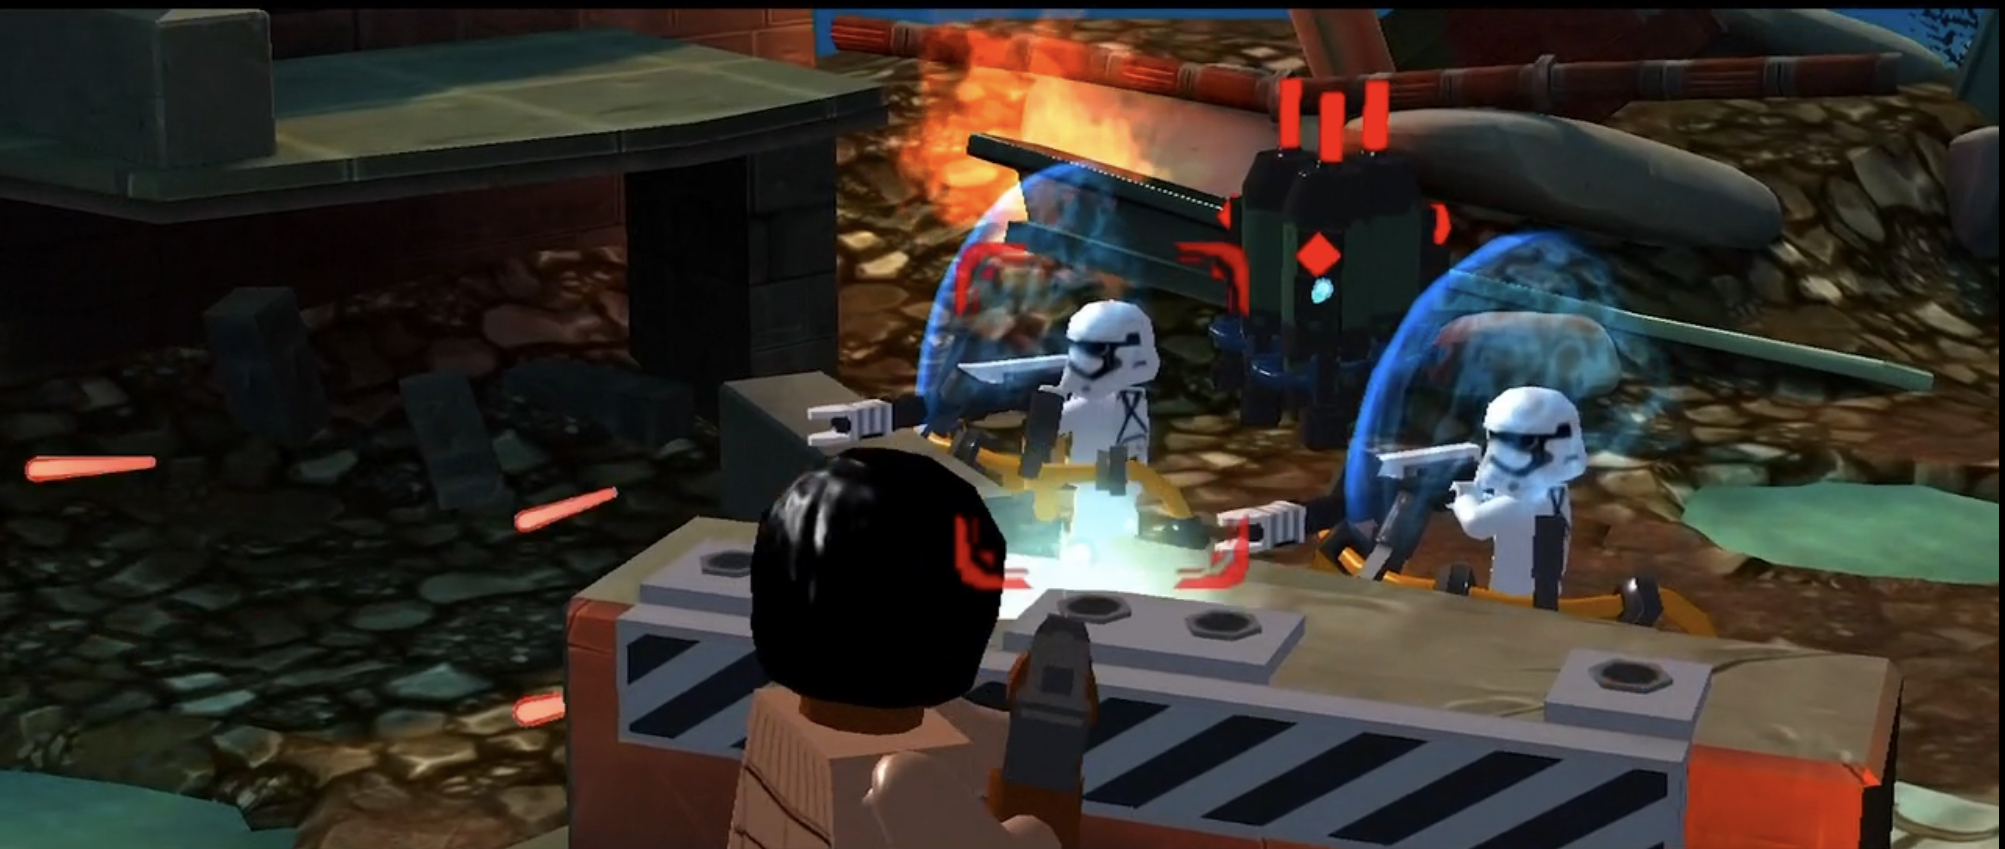 Best Star Wars Games For Iphone And Ipad In 2021 Imore - www roblox com war games